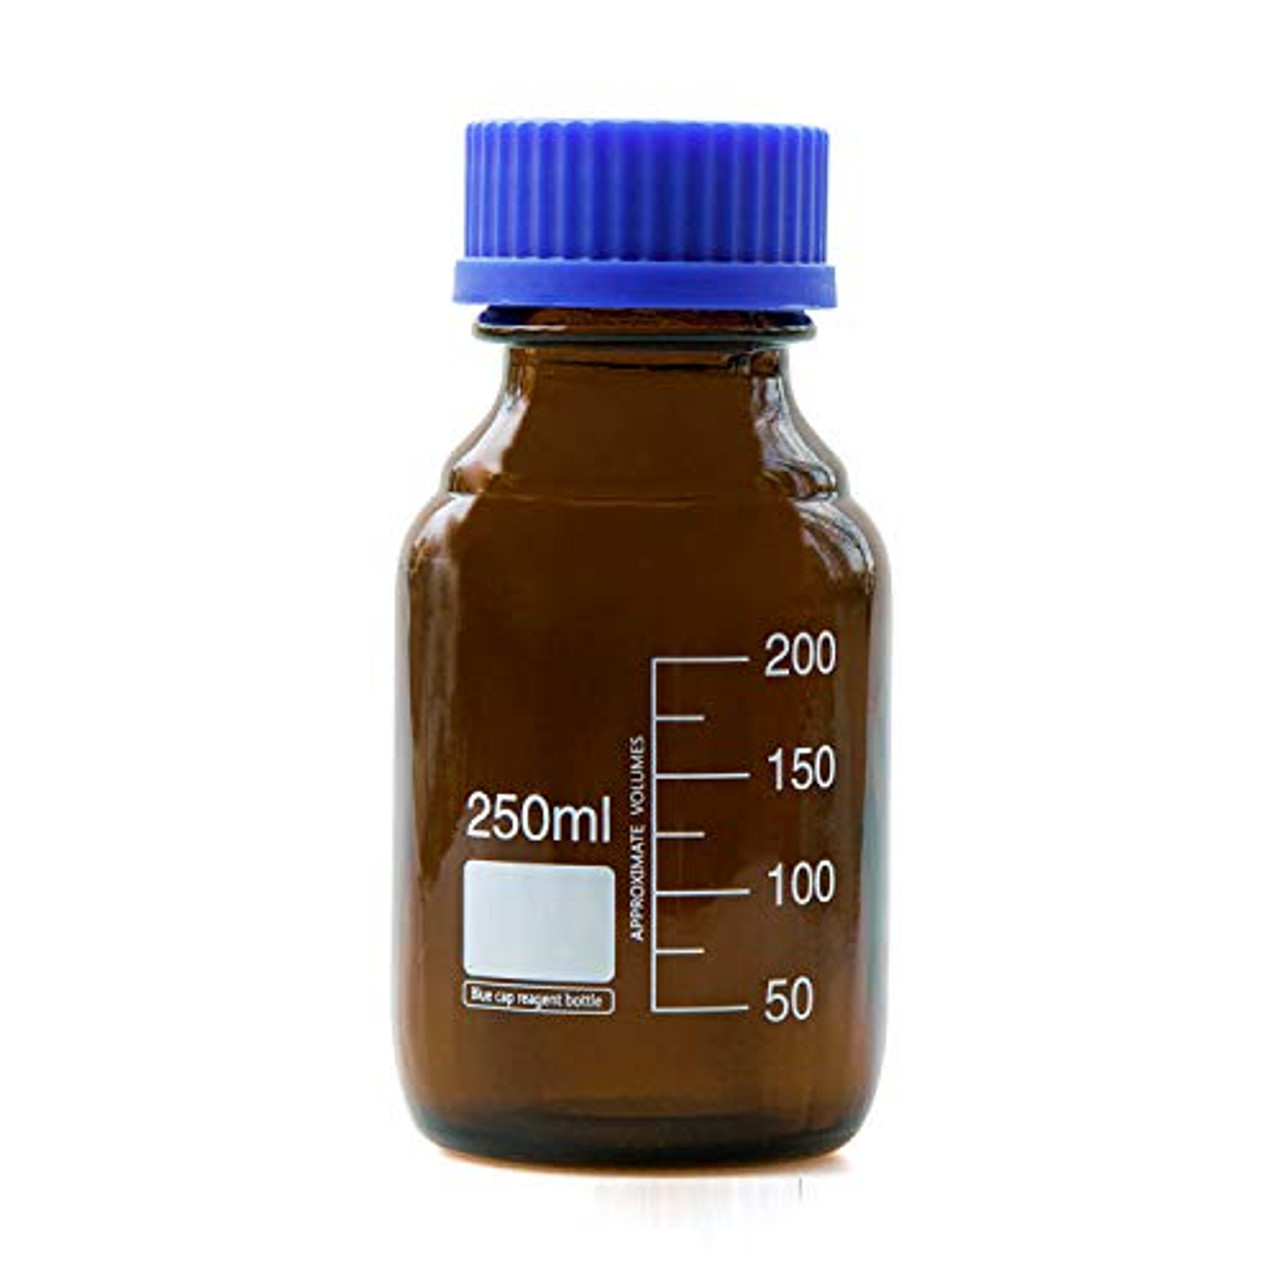 50 ML AMBER GLASS BOTTLE WITH SCREW CAP